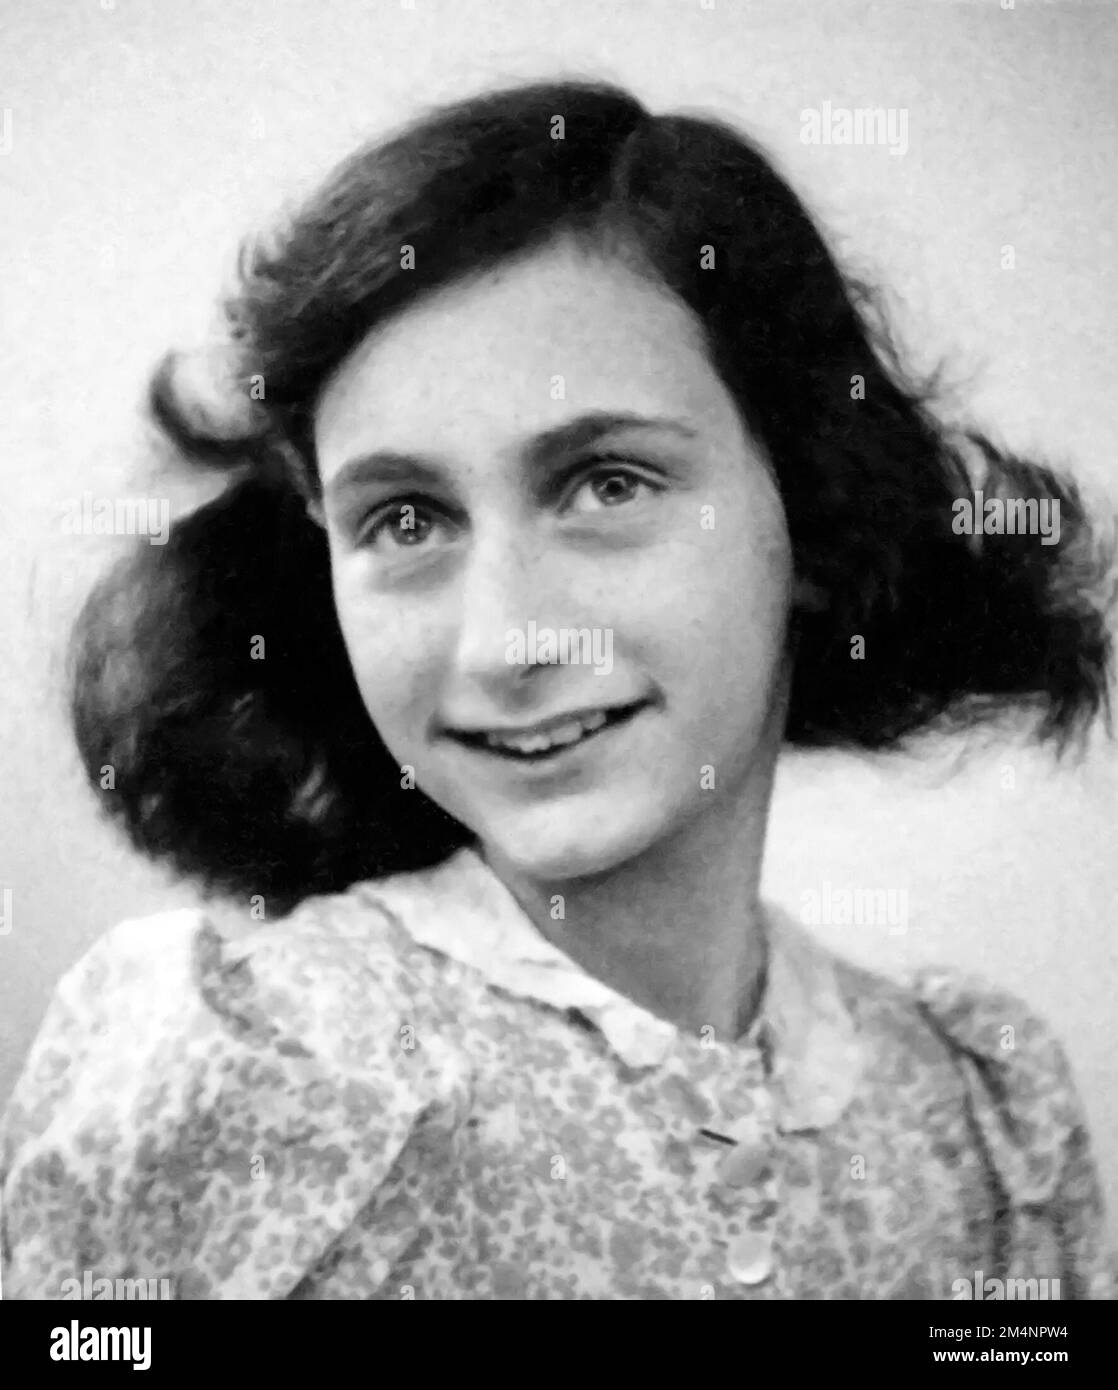 Anne Frank. Passport photo of Annelies Marie 'Anne' Frank (1929-1945), the young Jewish girl who's diary of life under Nazi occupation made her famous, 1942 Stock Photo